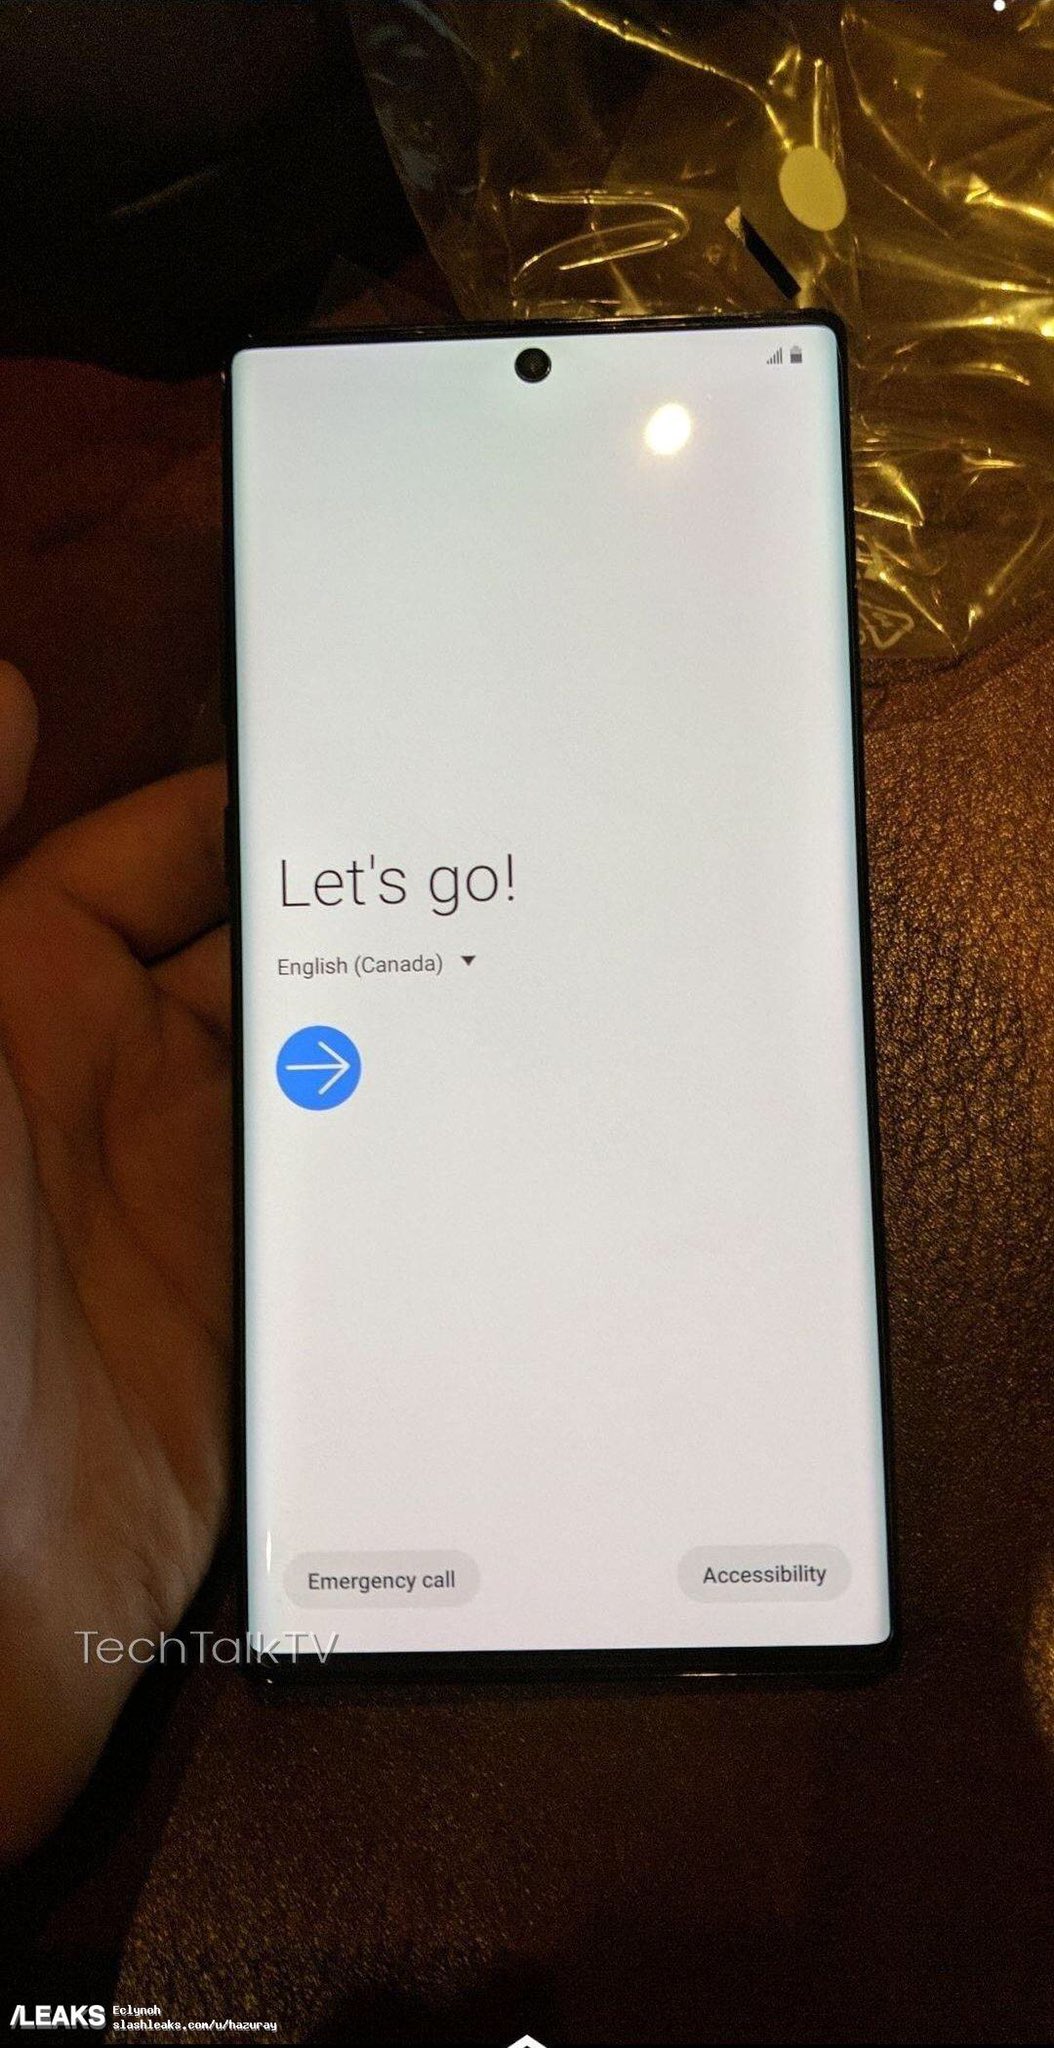 Samsung Galaxy Note 10+ live hands-on images leaked